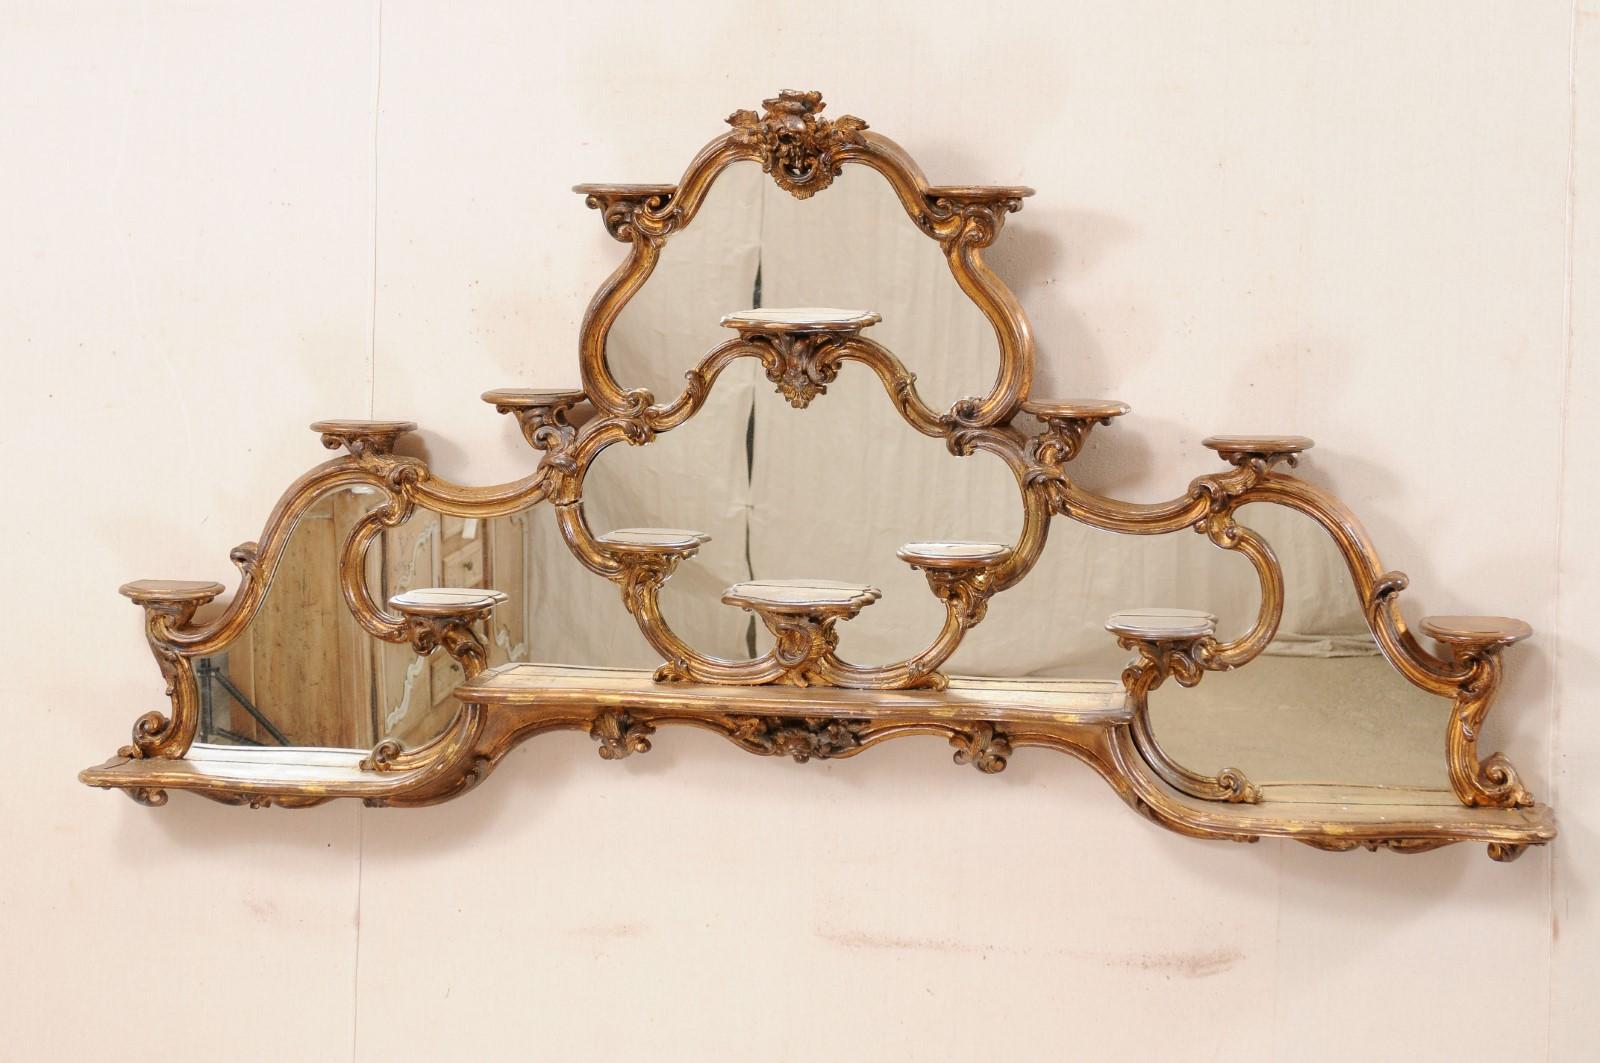 Gilt Italian Rococo Style Wall Étagère with Mirrored Back, 19th Century